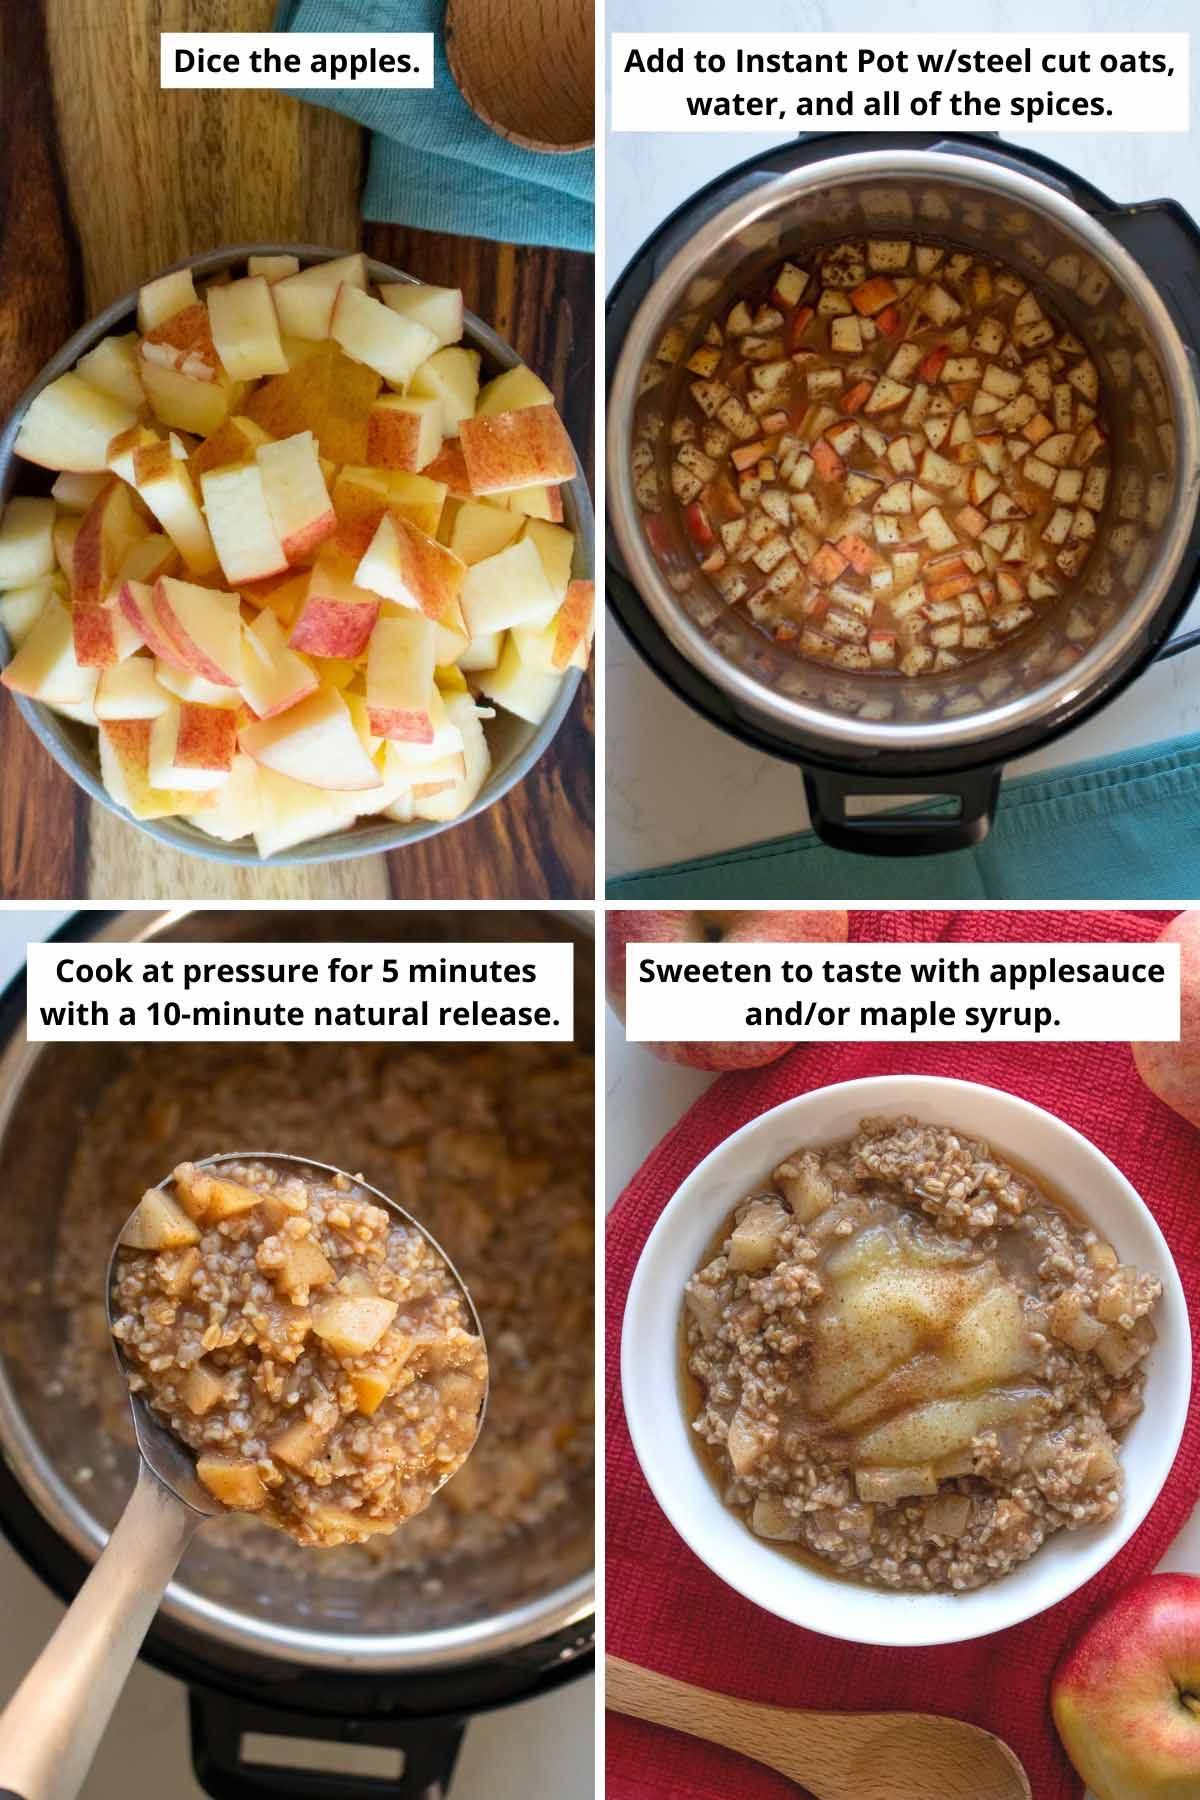 image collage showing the diced apples, the steel cut oat ingredients in the Instant Pot before cooking, the cooked oats in a ladle, and the oats toped with applesauce and maple syrup